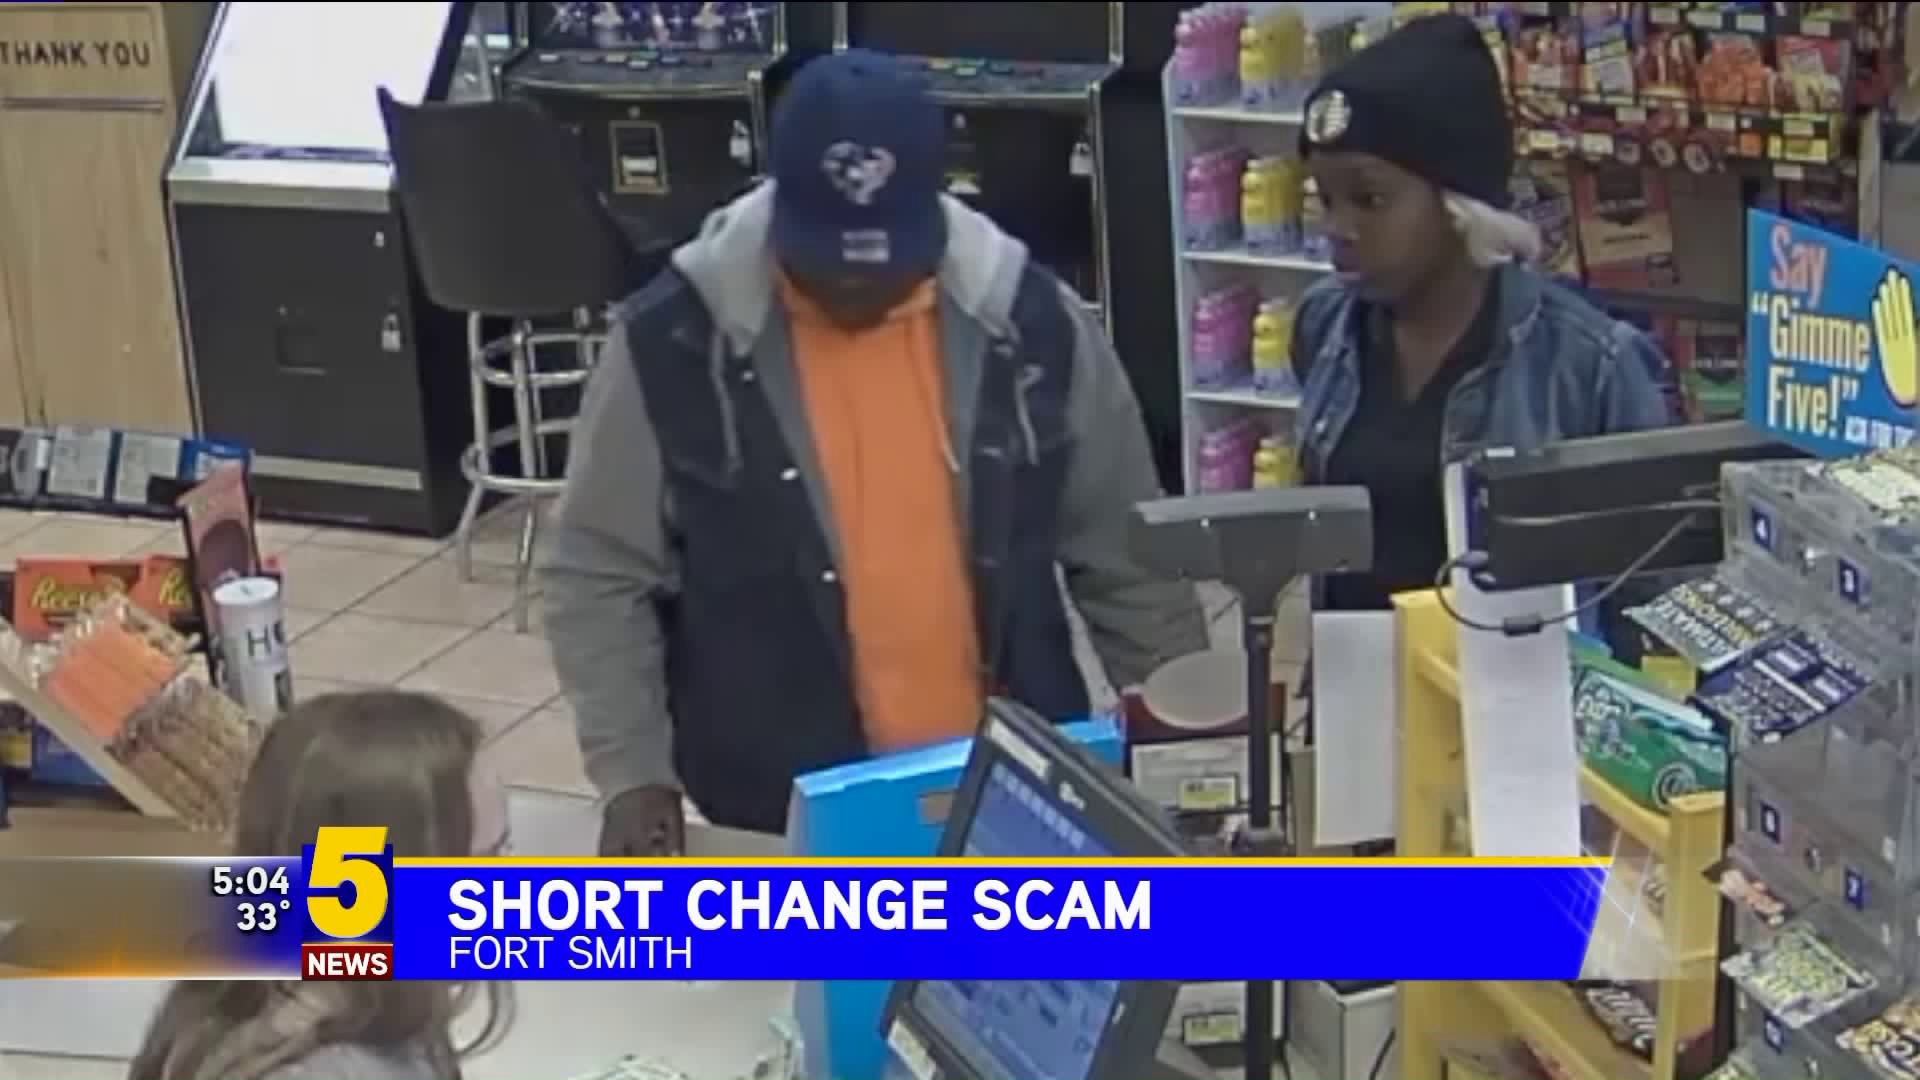 Short Change Scam in Fort Smith